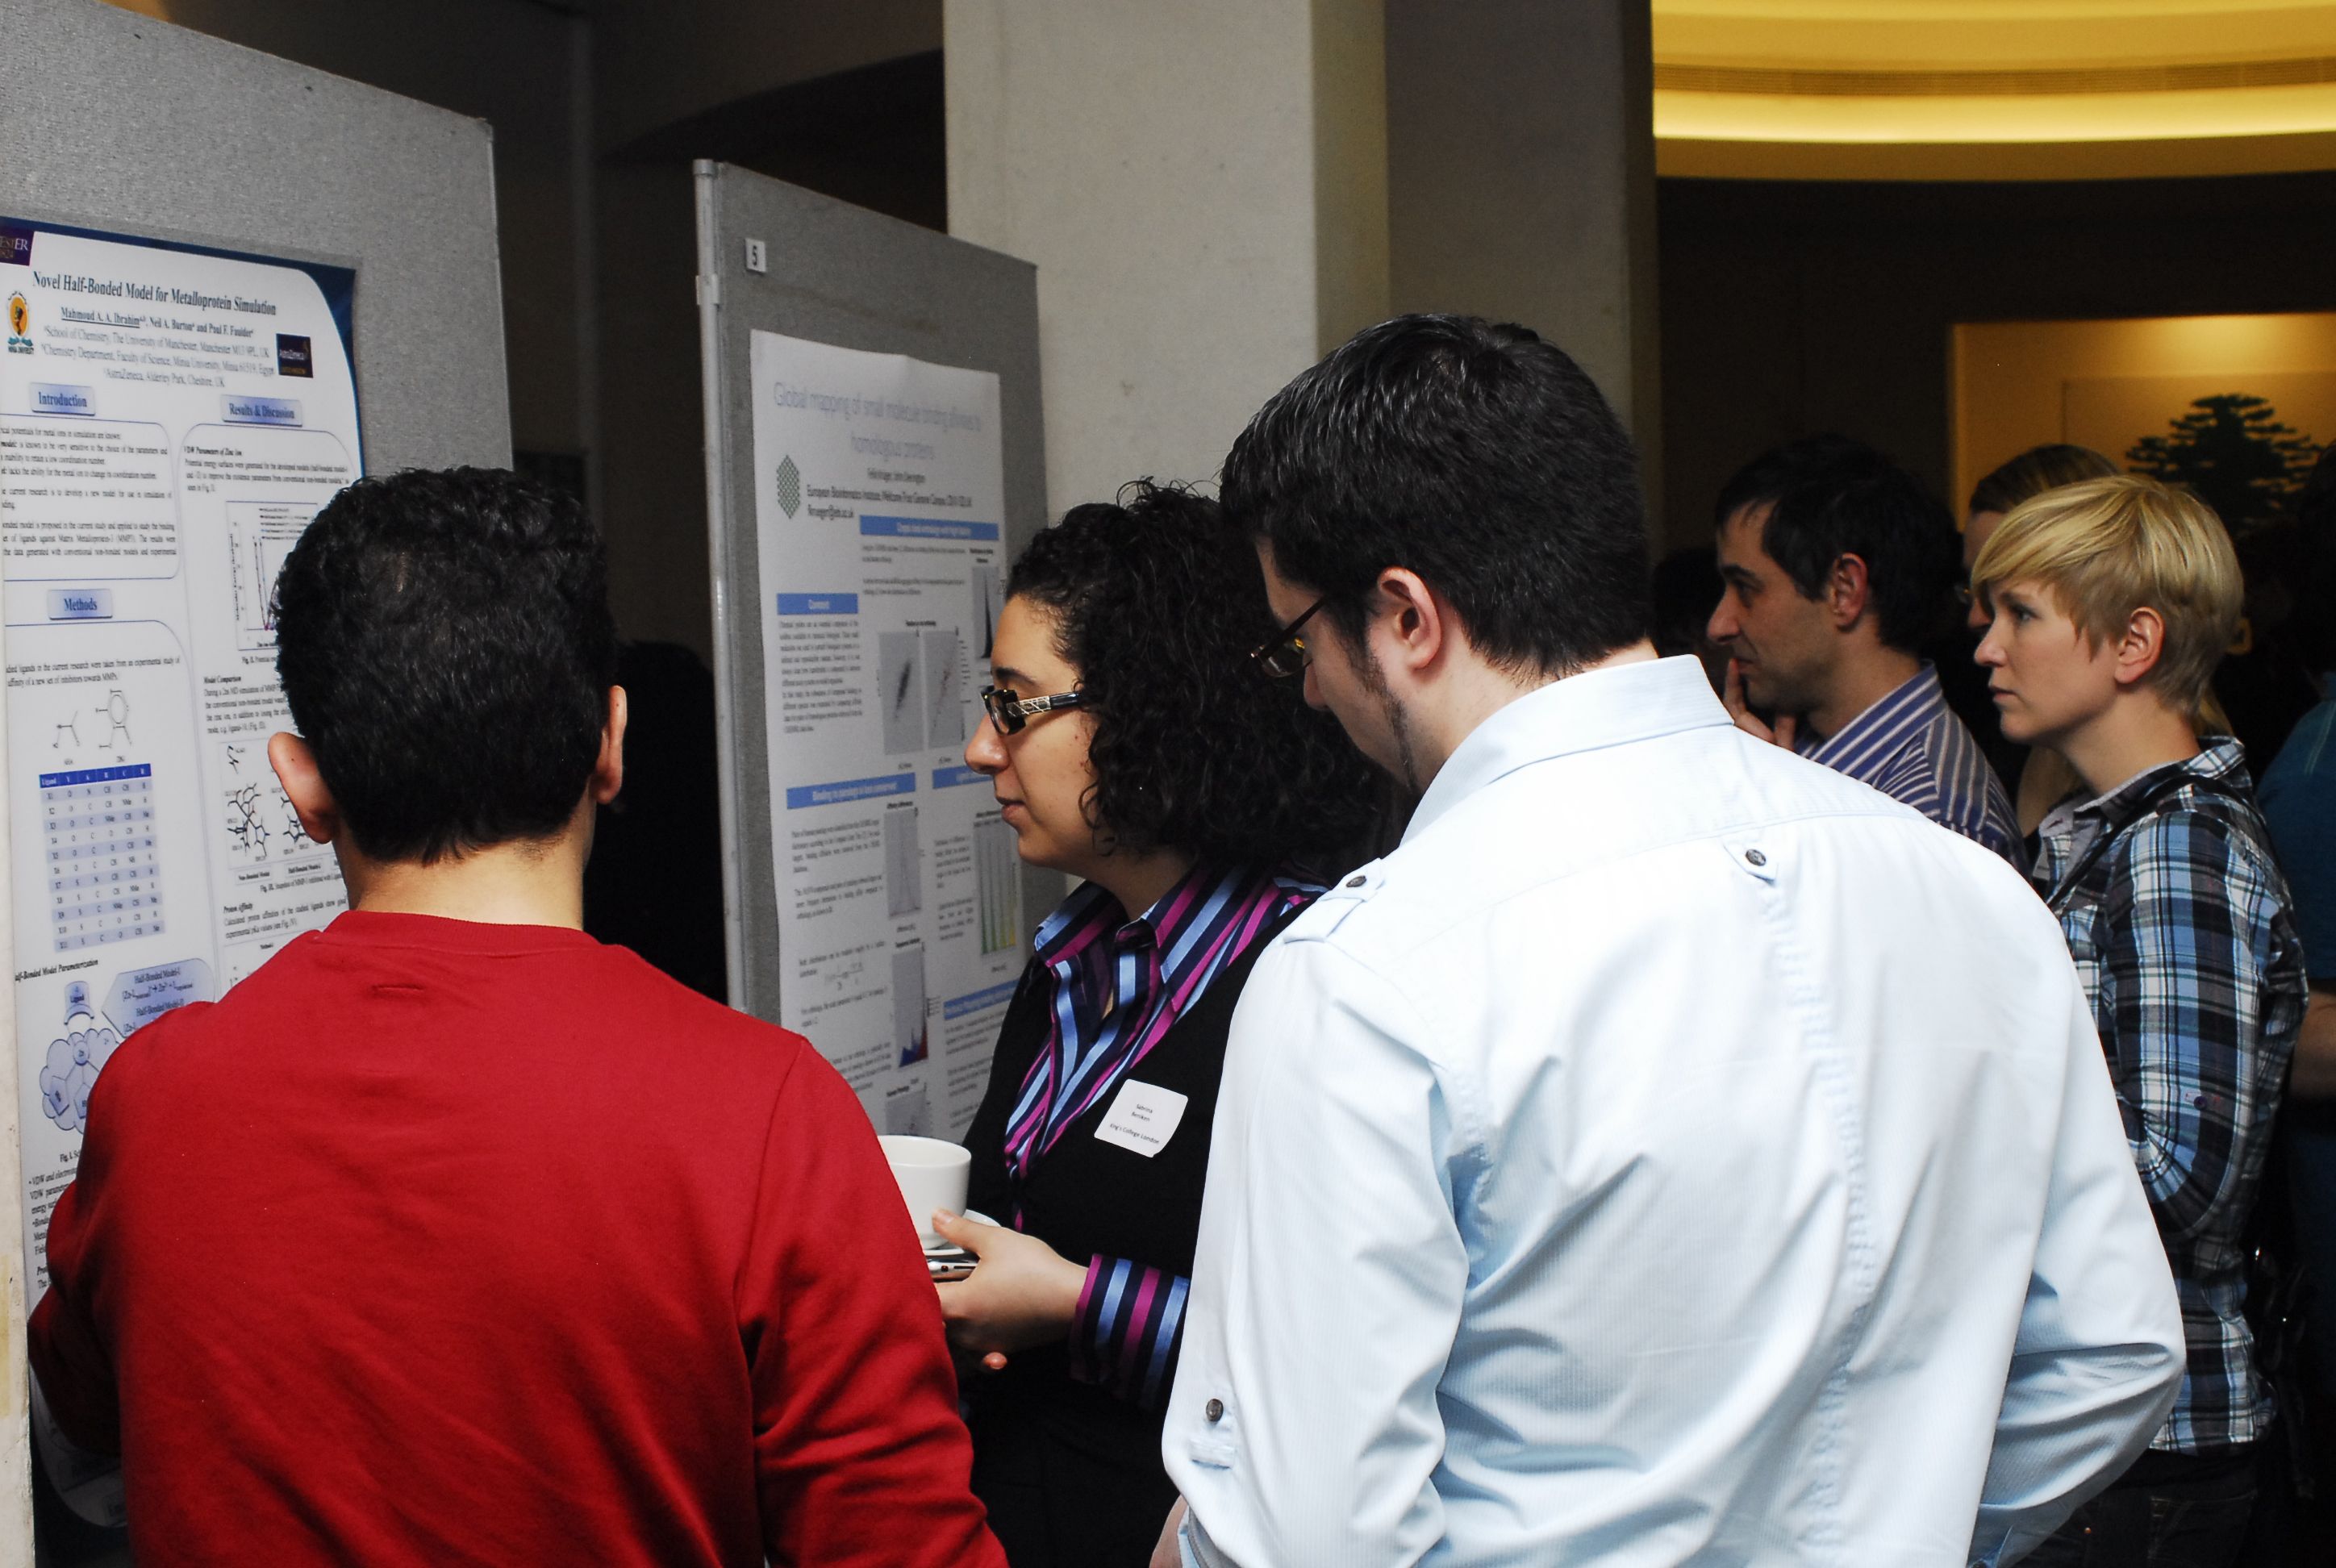 YMF poster session